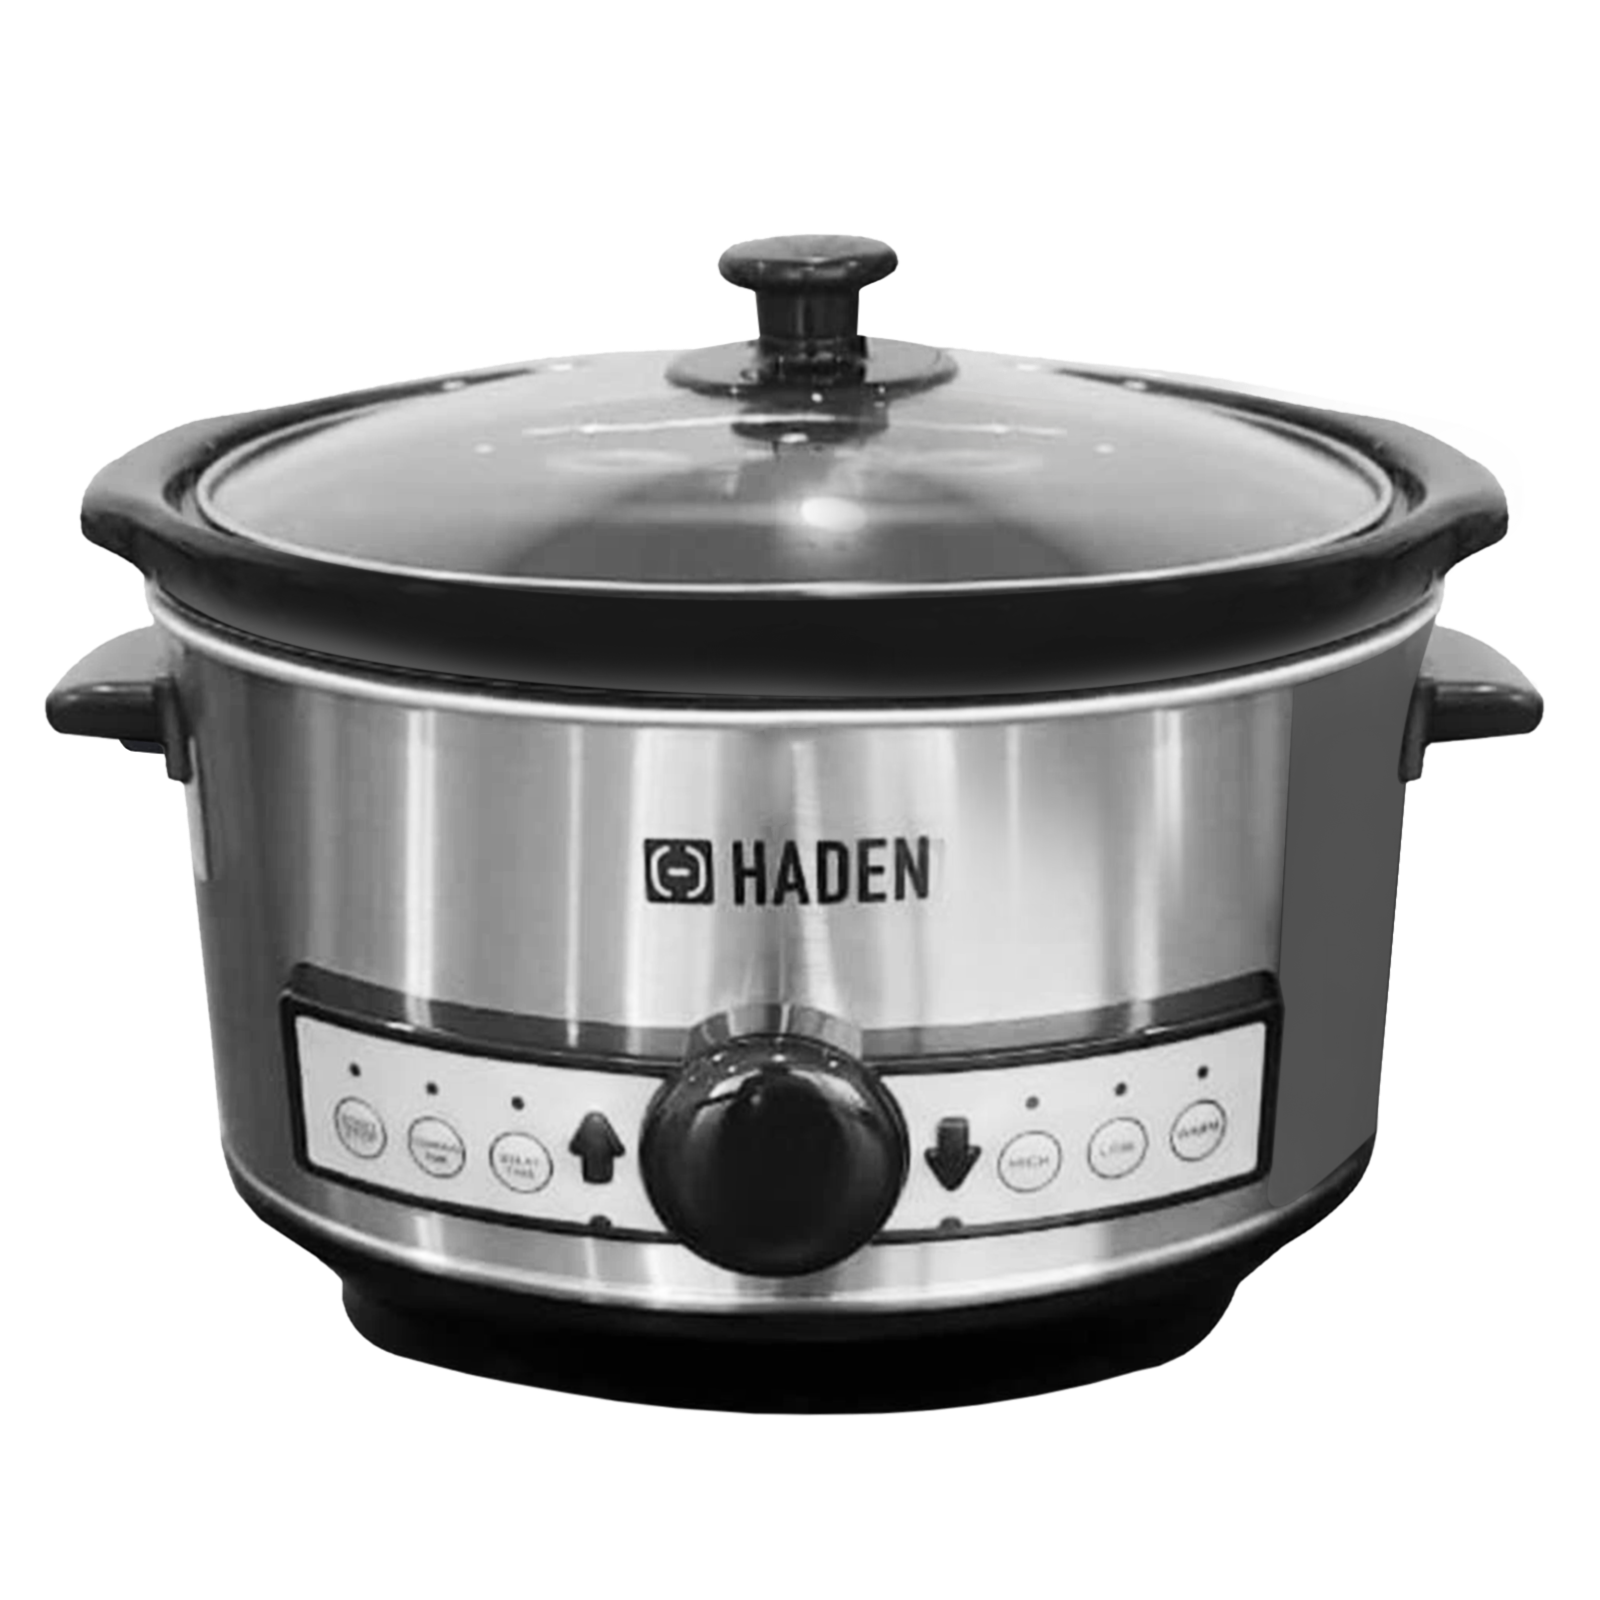 Haden 3.5 Litres Digital Slow Cooker (With Timer, Silver)